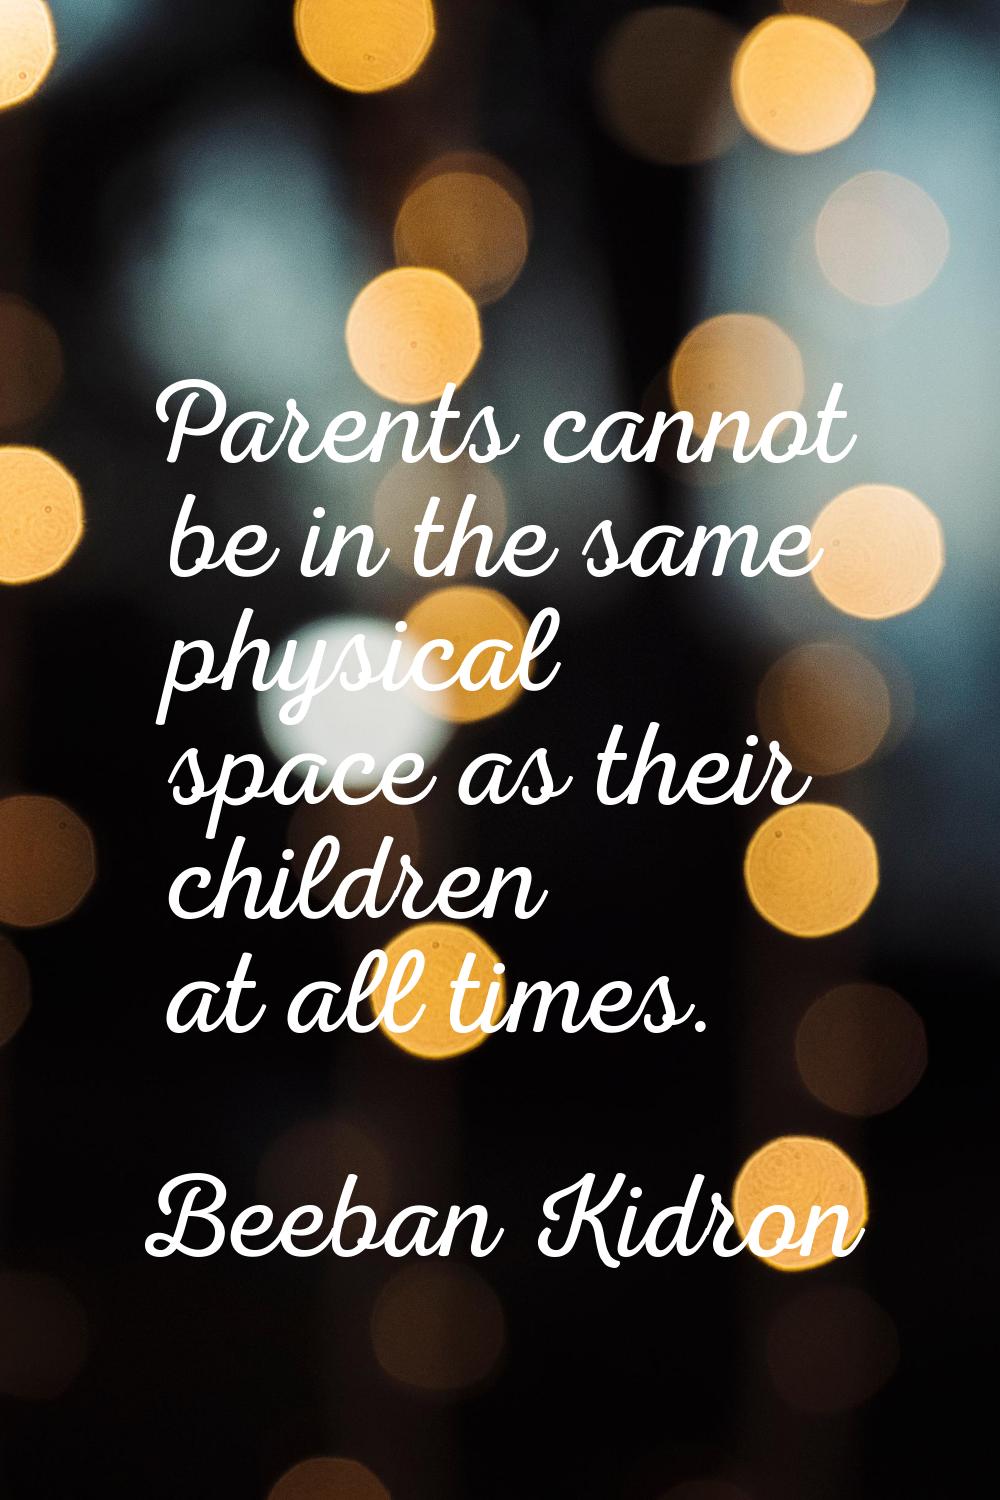 Parents cannot be in the same physical space as their children at all times.